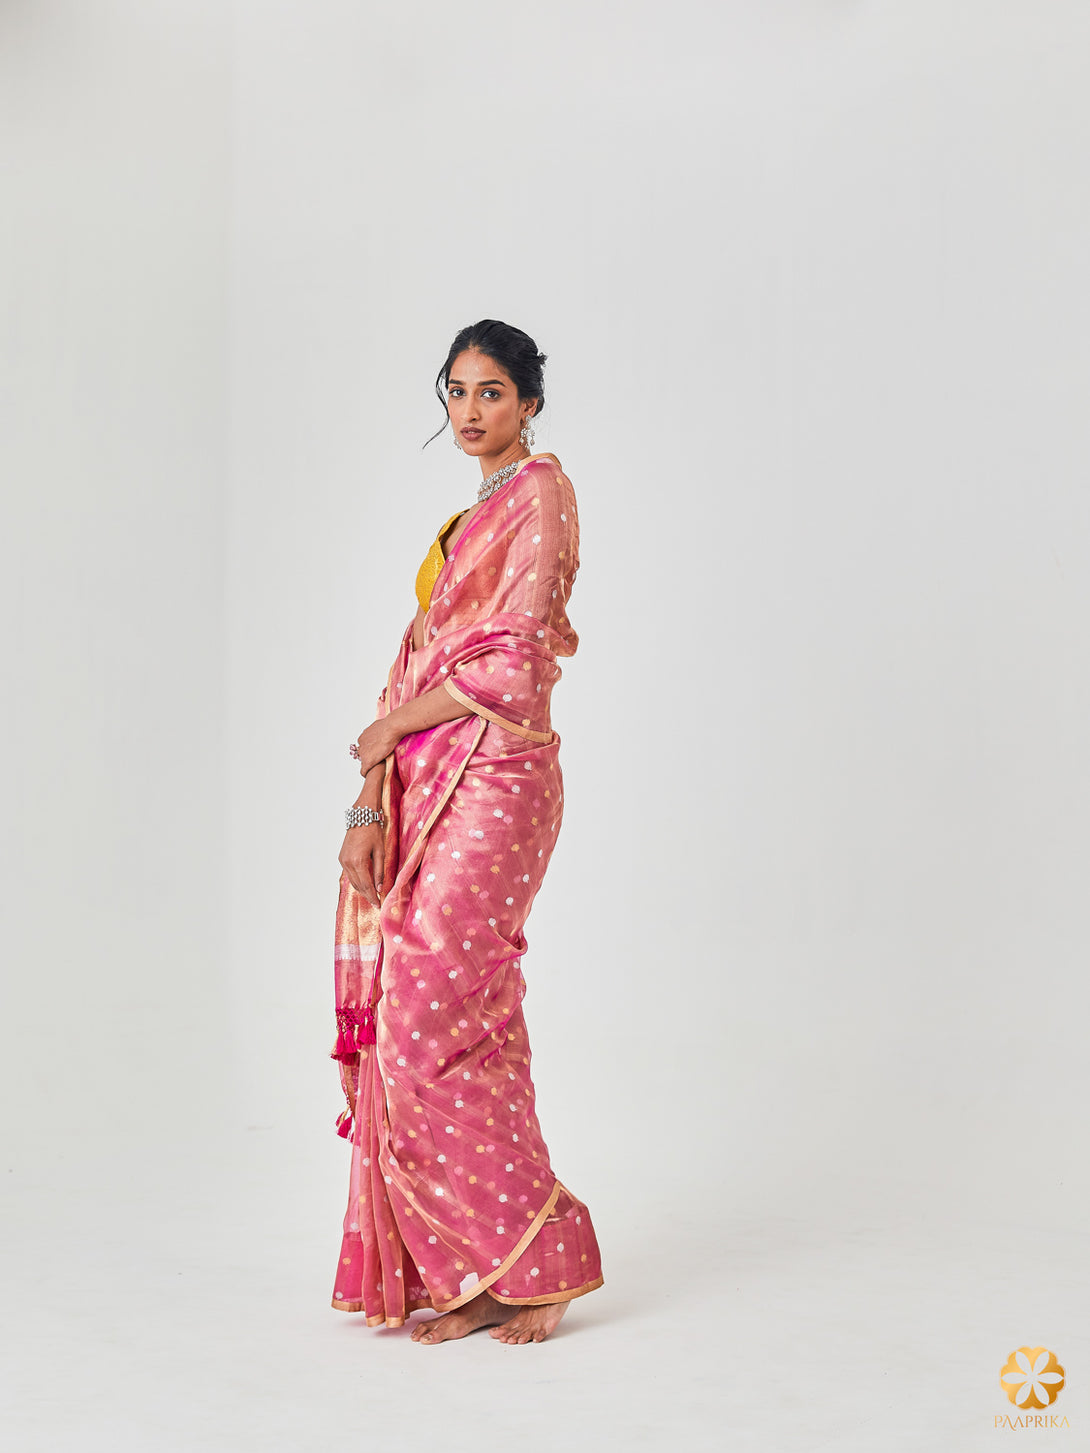 Beautiful Drape of Luxurious Blush Pink Handwoven Tissue Saree - Elegance Personified.